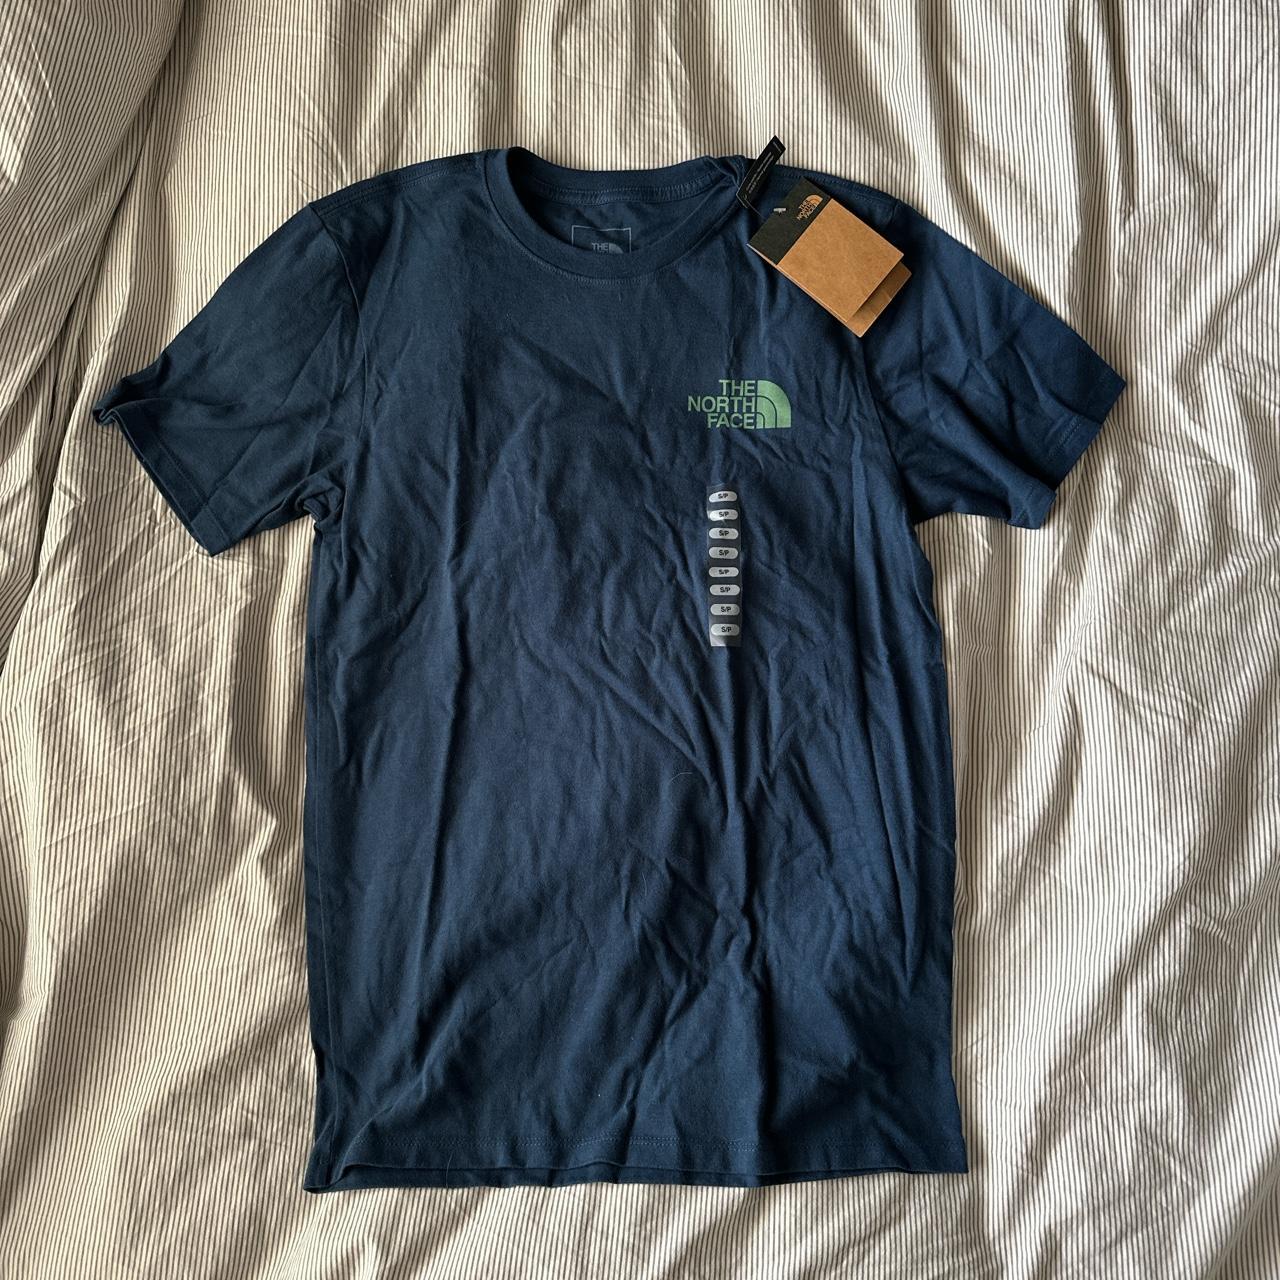 The North Face Men's Navy T-shirt